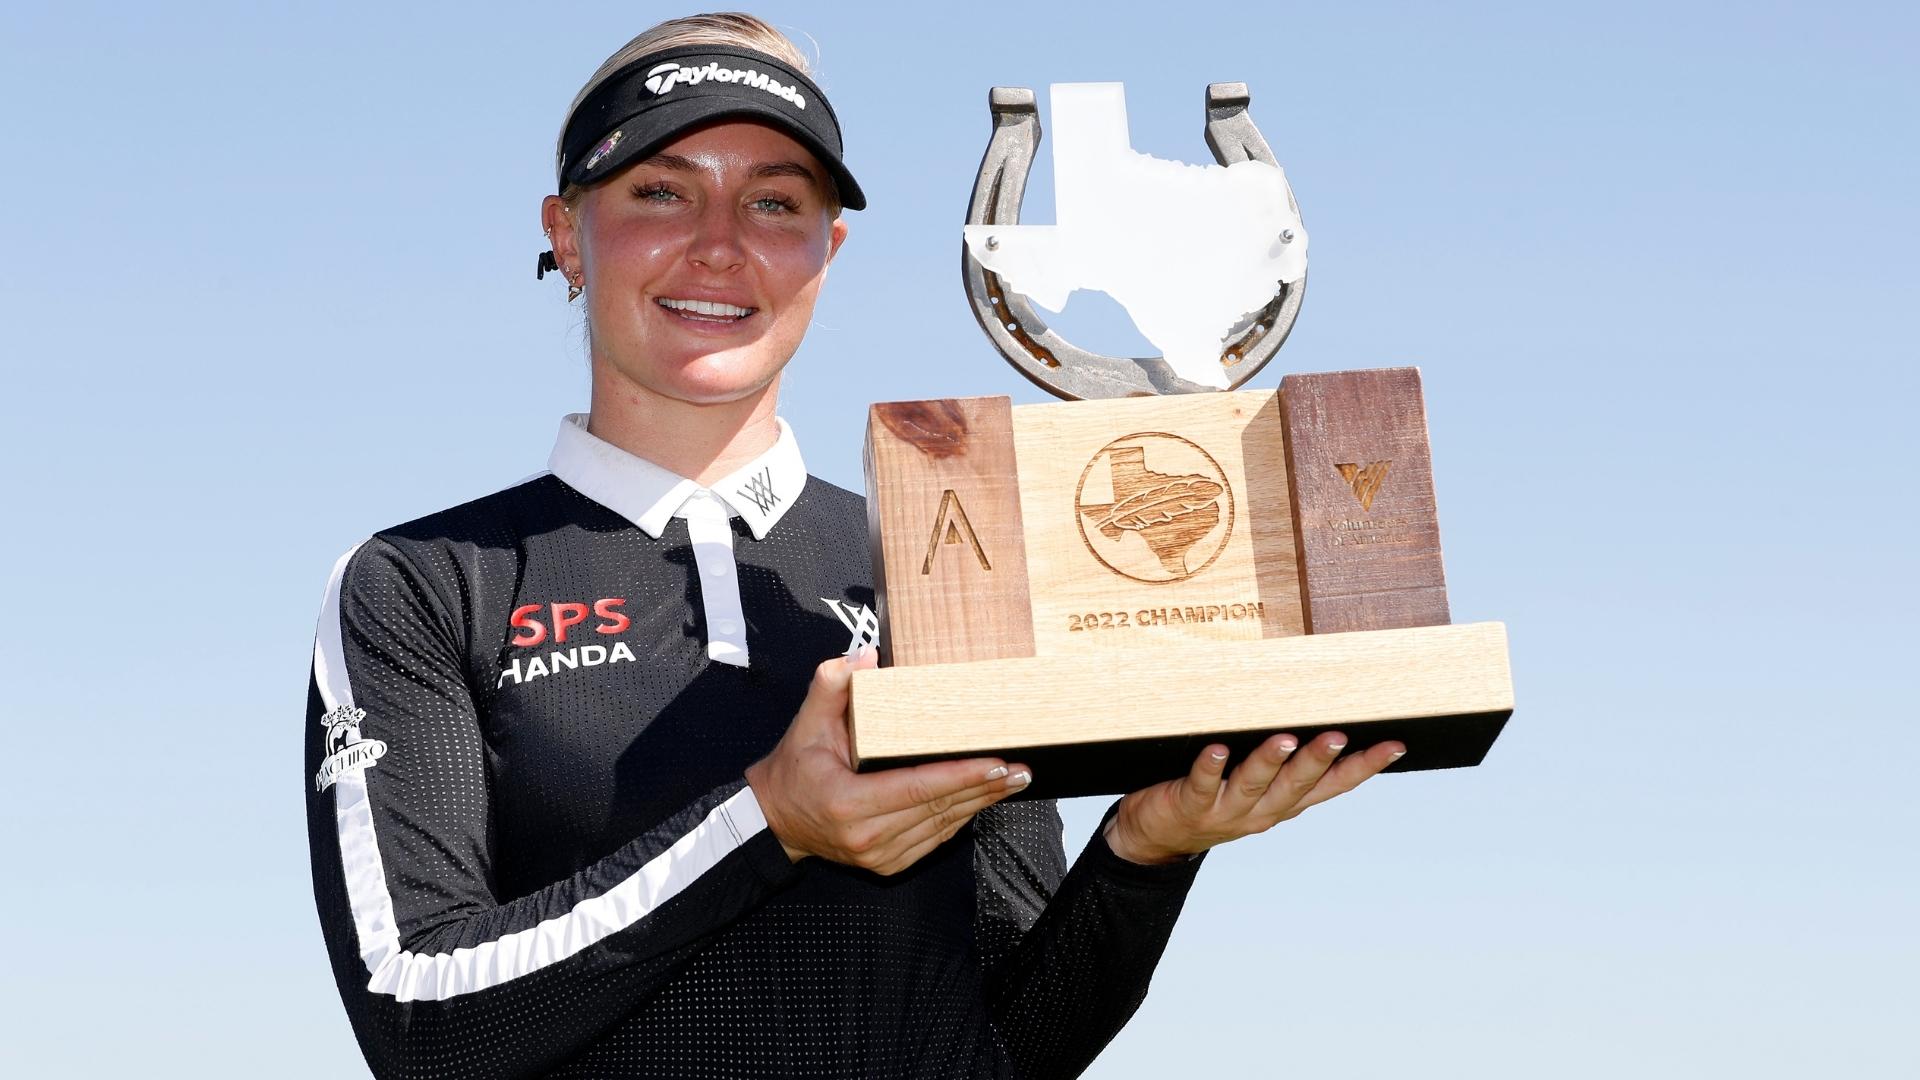 Charley Hull wins in Texas to end 6 year LPGA title drought